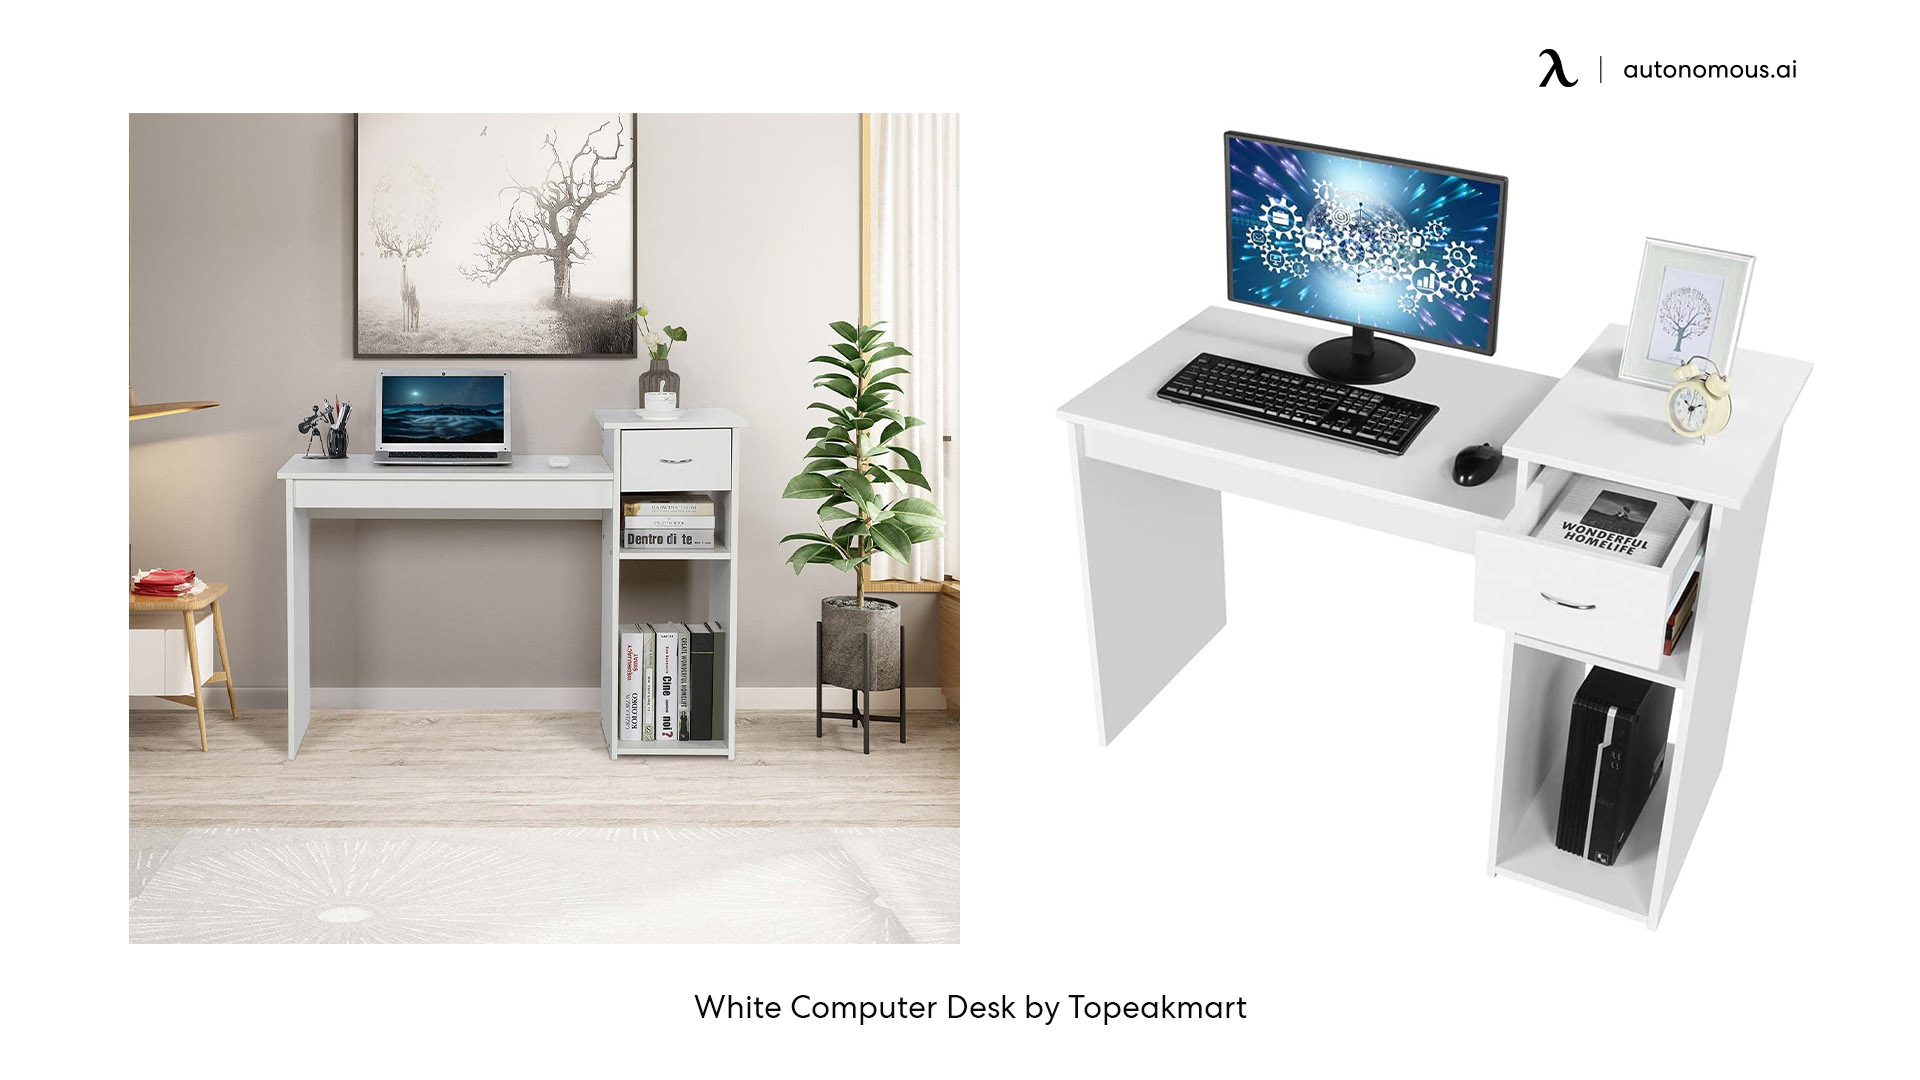 White Computer Desk by Topeakmart